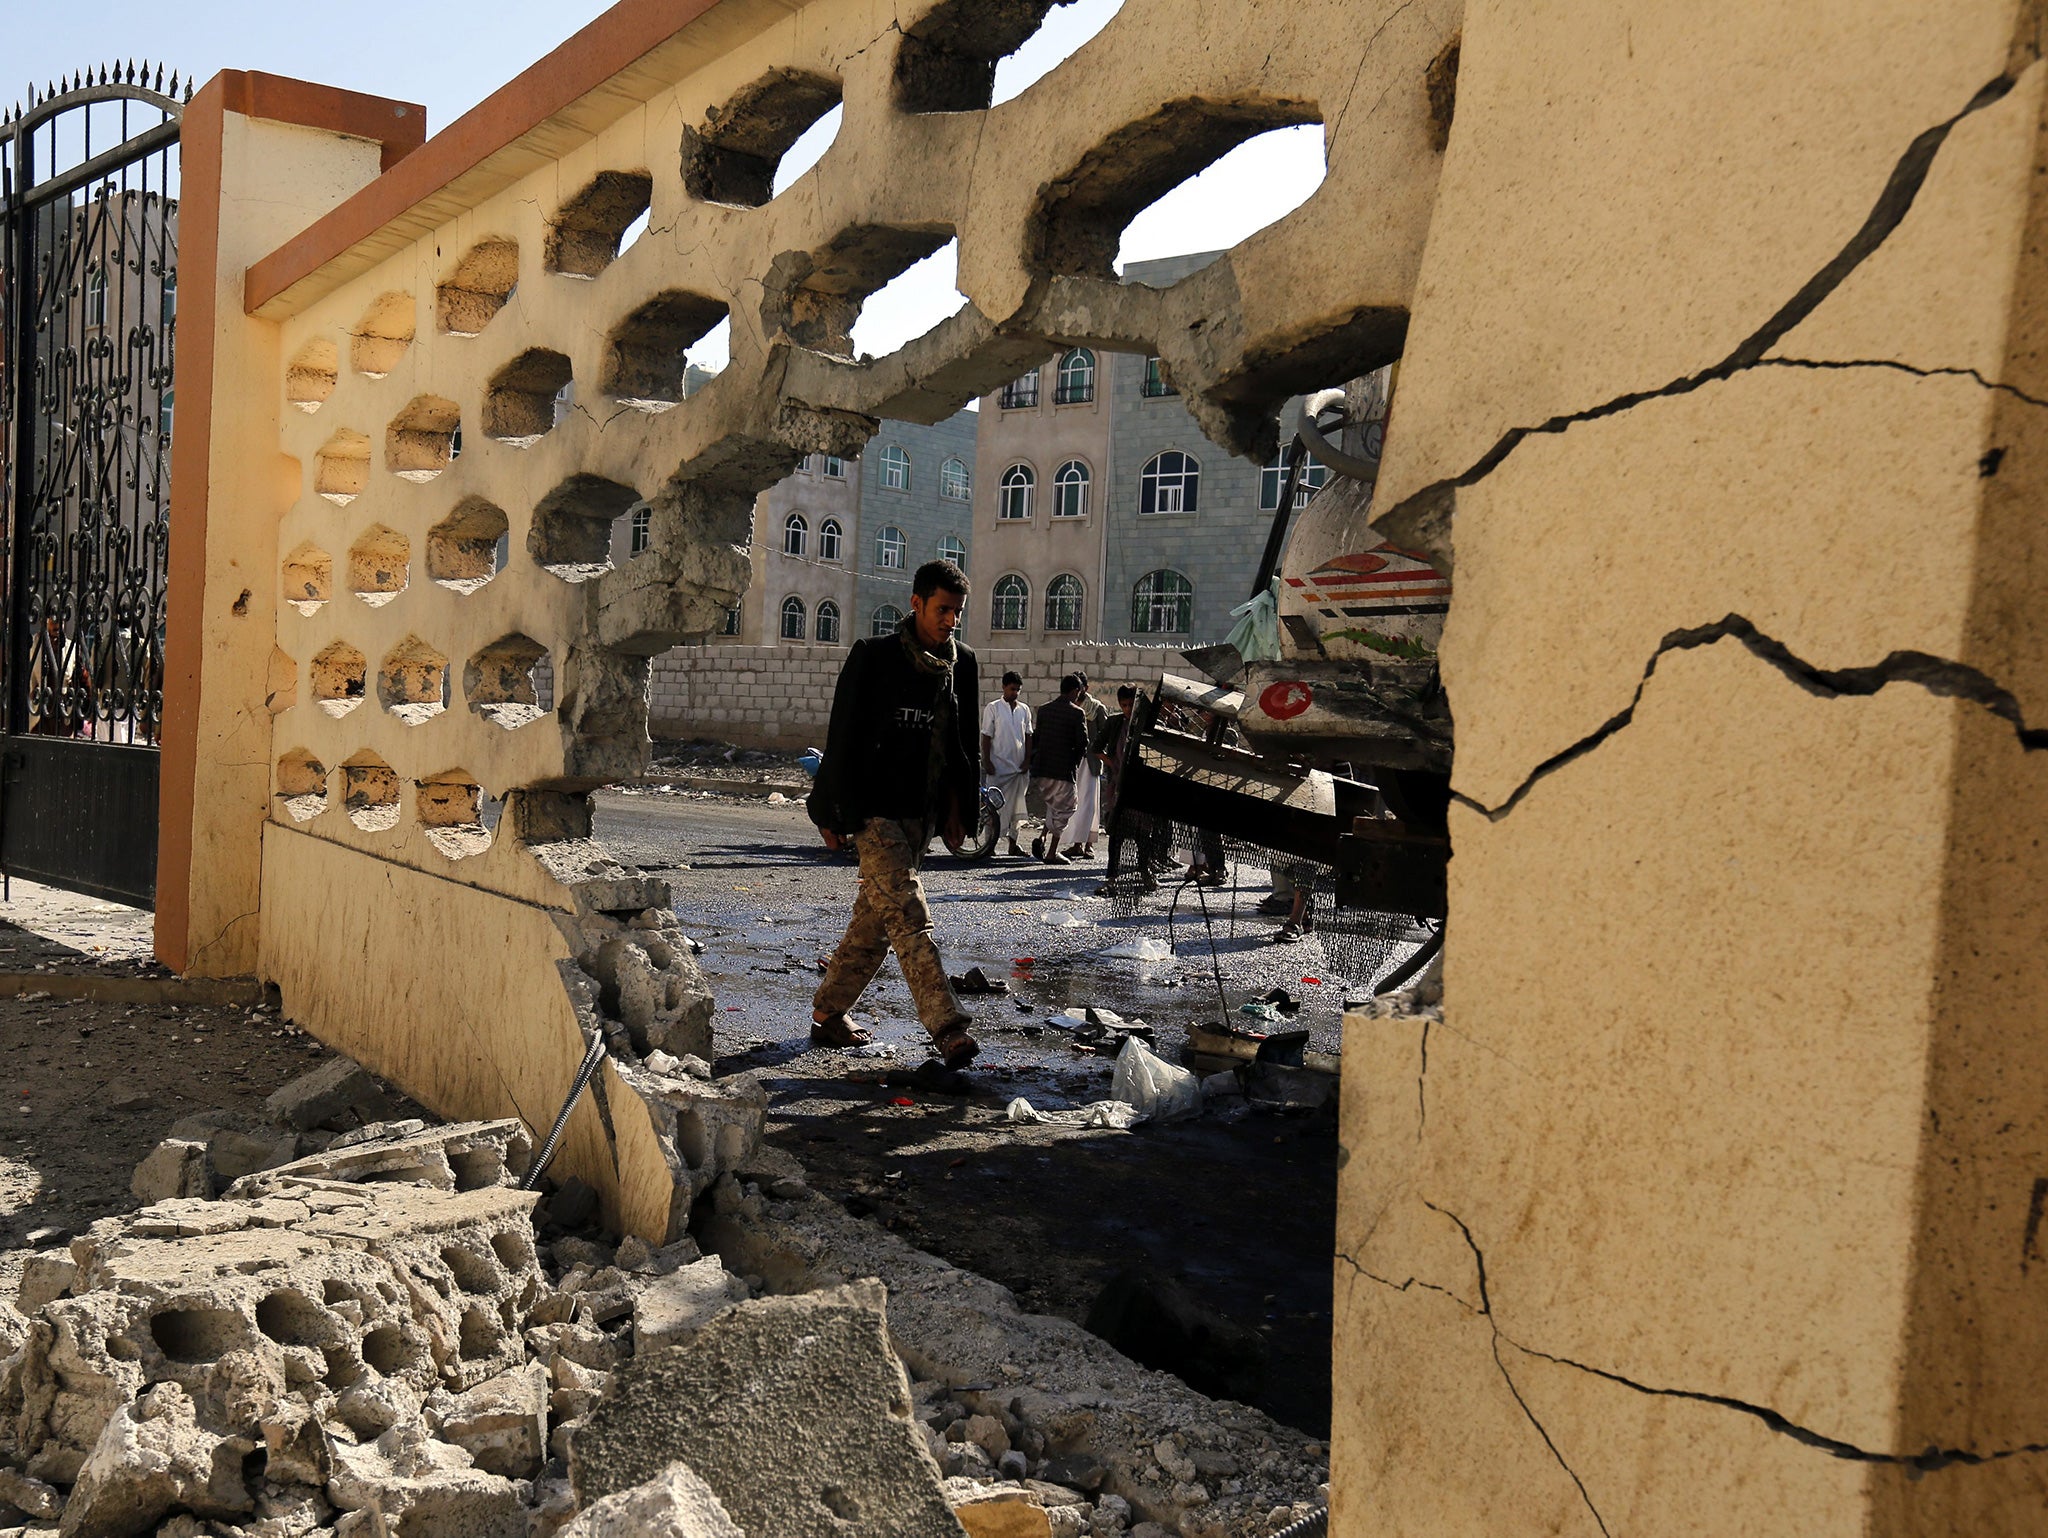 A member of the Houthi militia inspects the site of a suicide attack targeting a mosque in Sana'a, Yemen, 07 October 2015